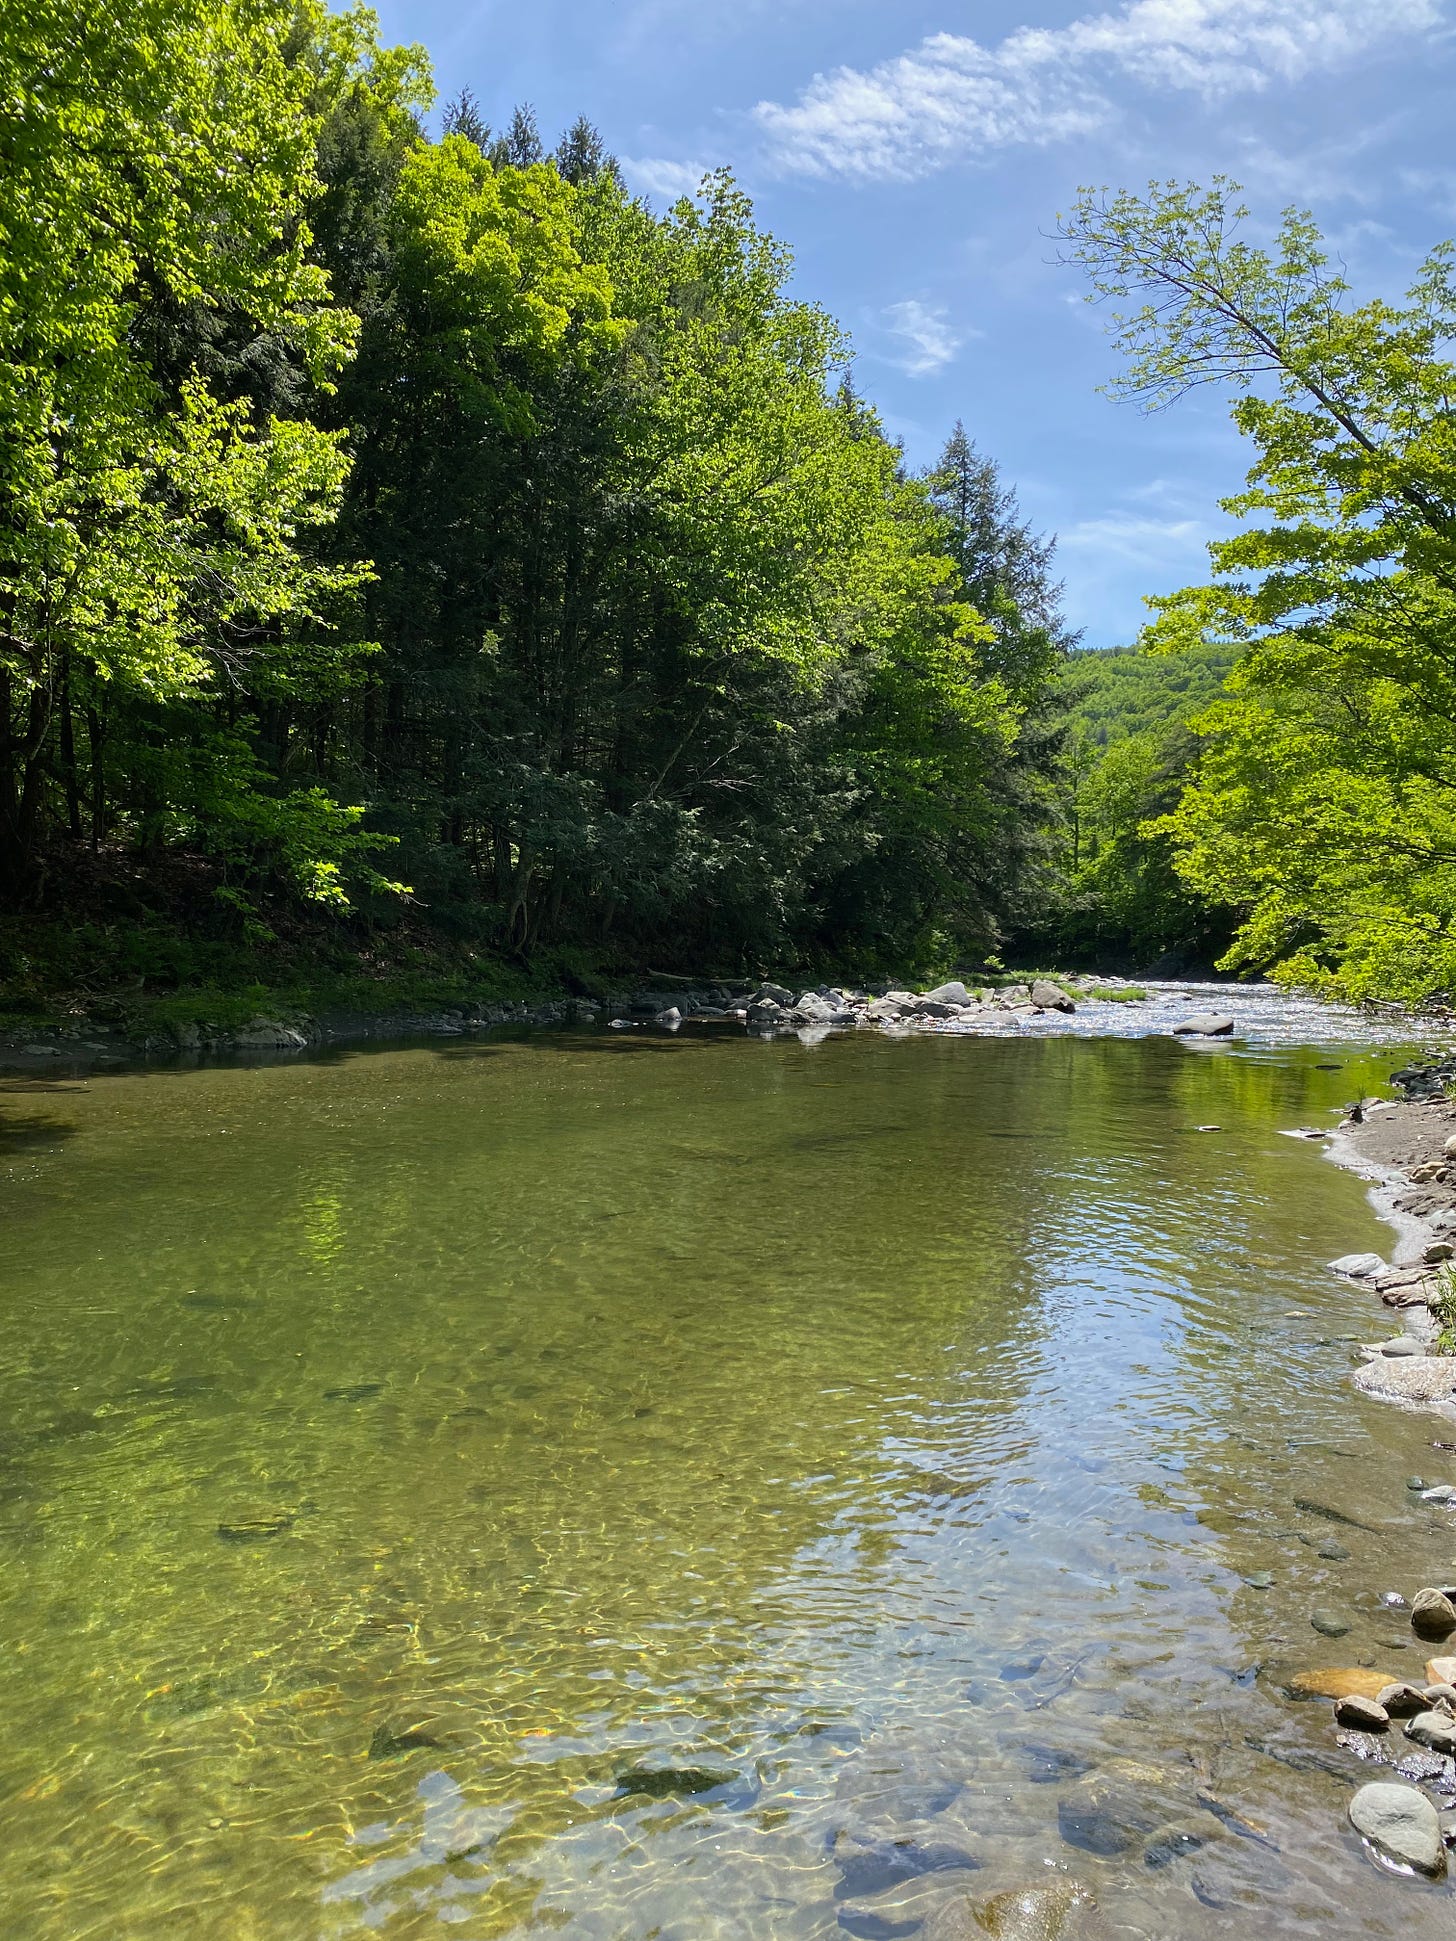 A still deep pool on a rocky river, rippled sunlight reflecting on its surface. Green trees in full leaf line the banks and the sky is a pale blue.